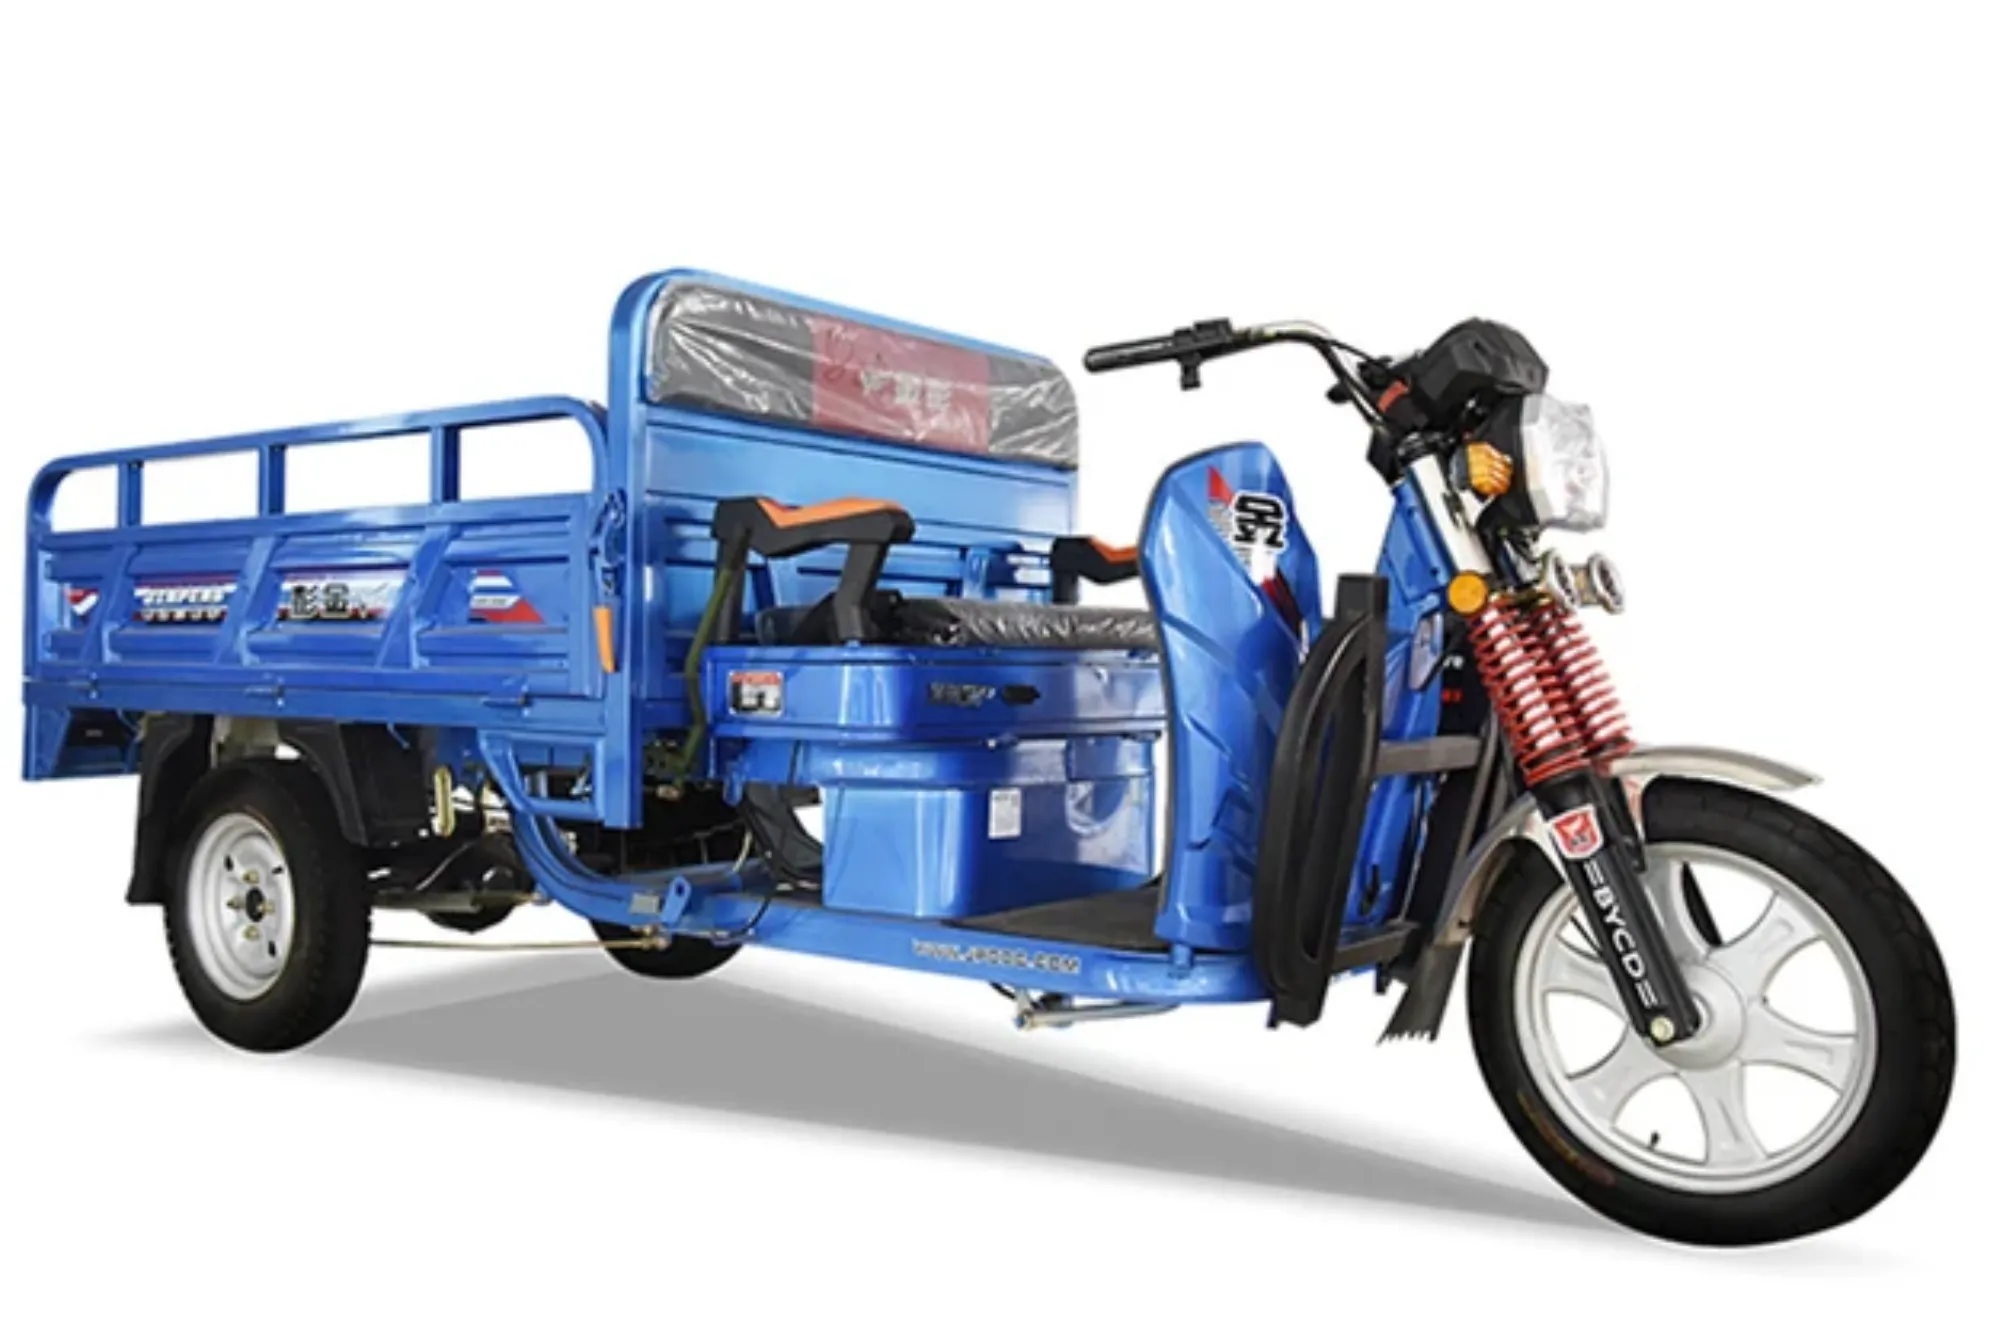 JINPENG's Electric Trike Motorcycles Shaping the Future of Sustainable Transportation